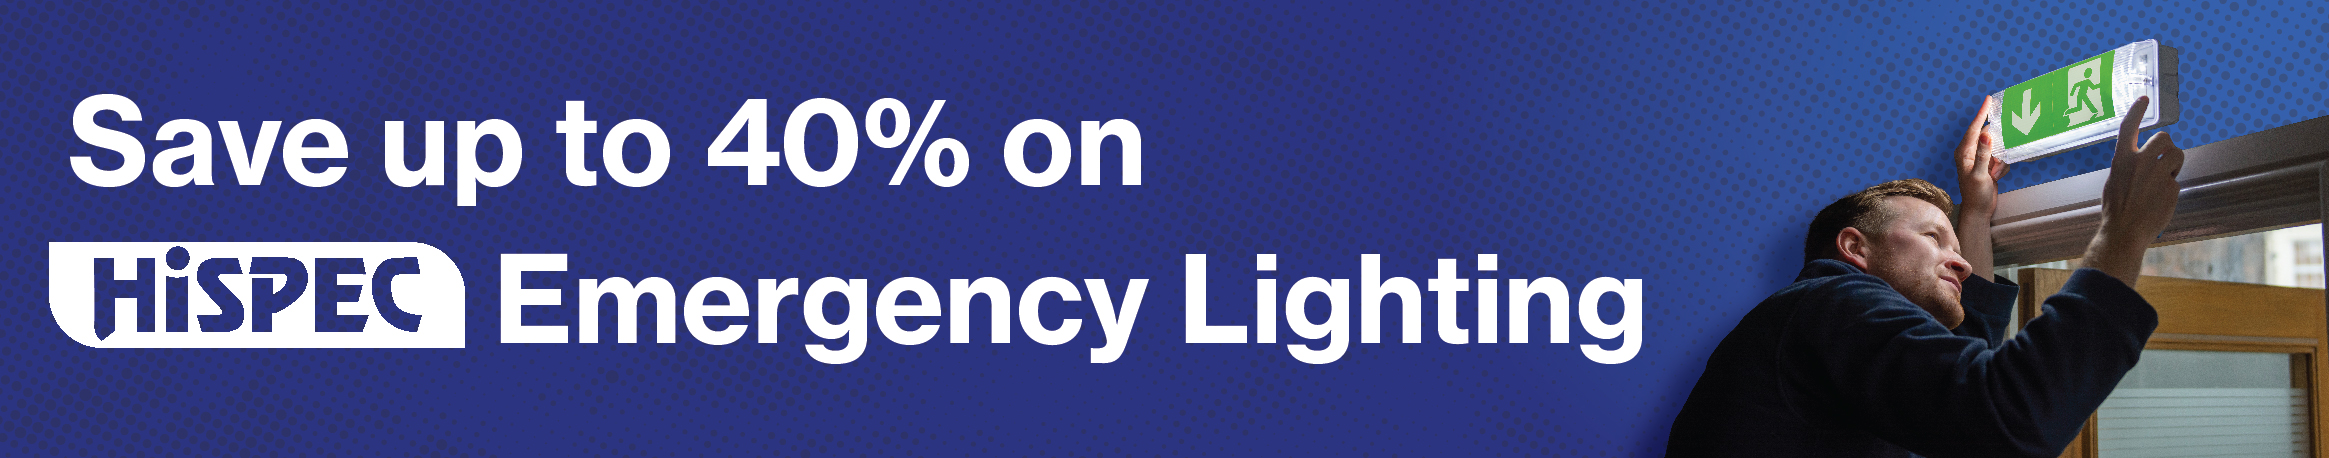 Save up to 40% on Hispec emergency lighting